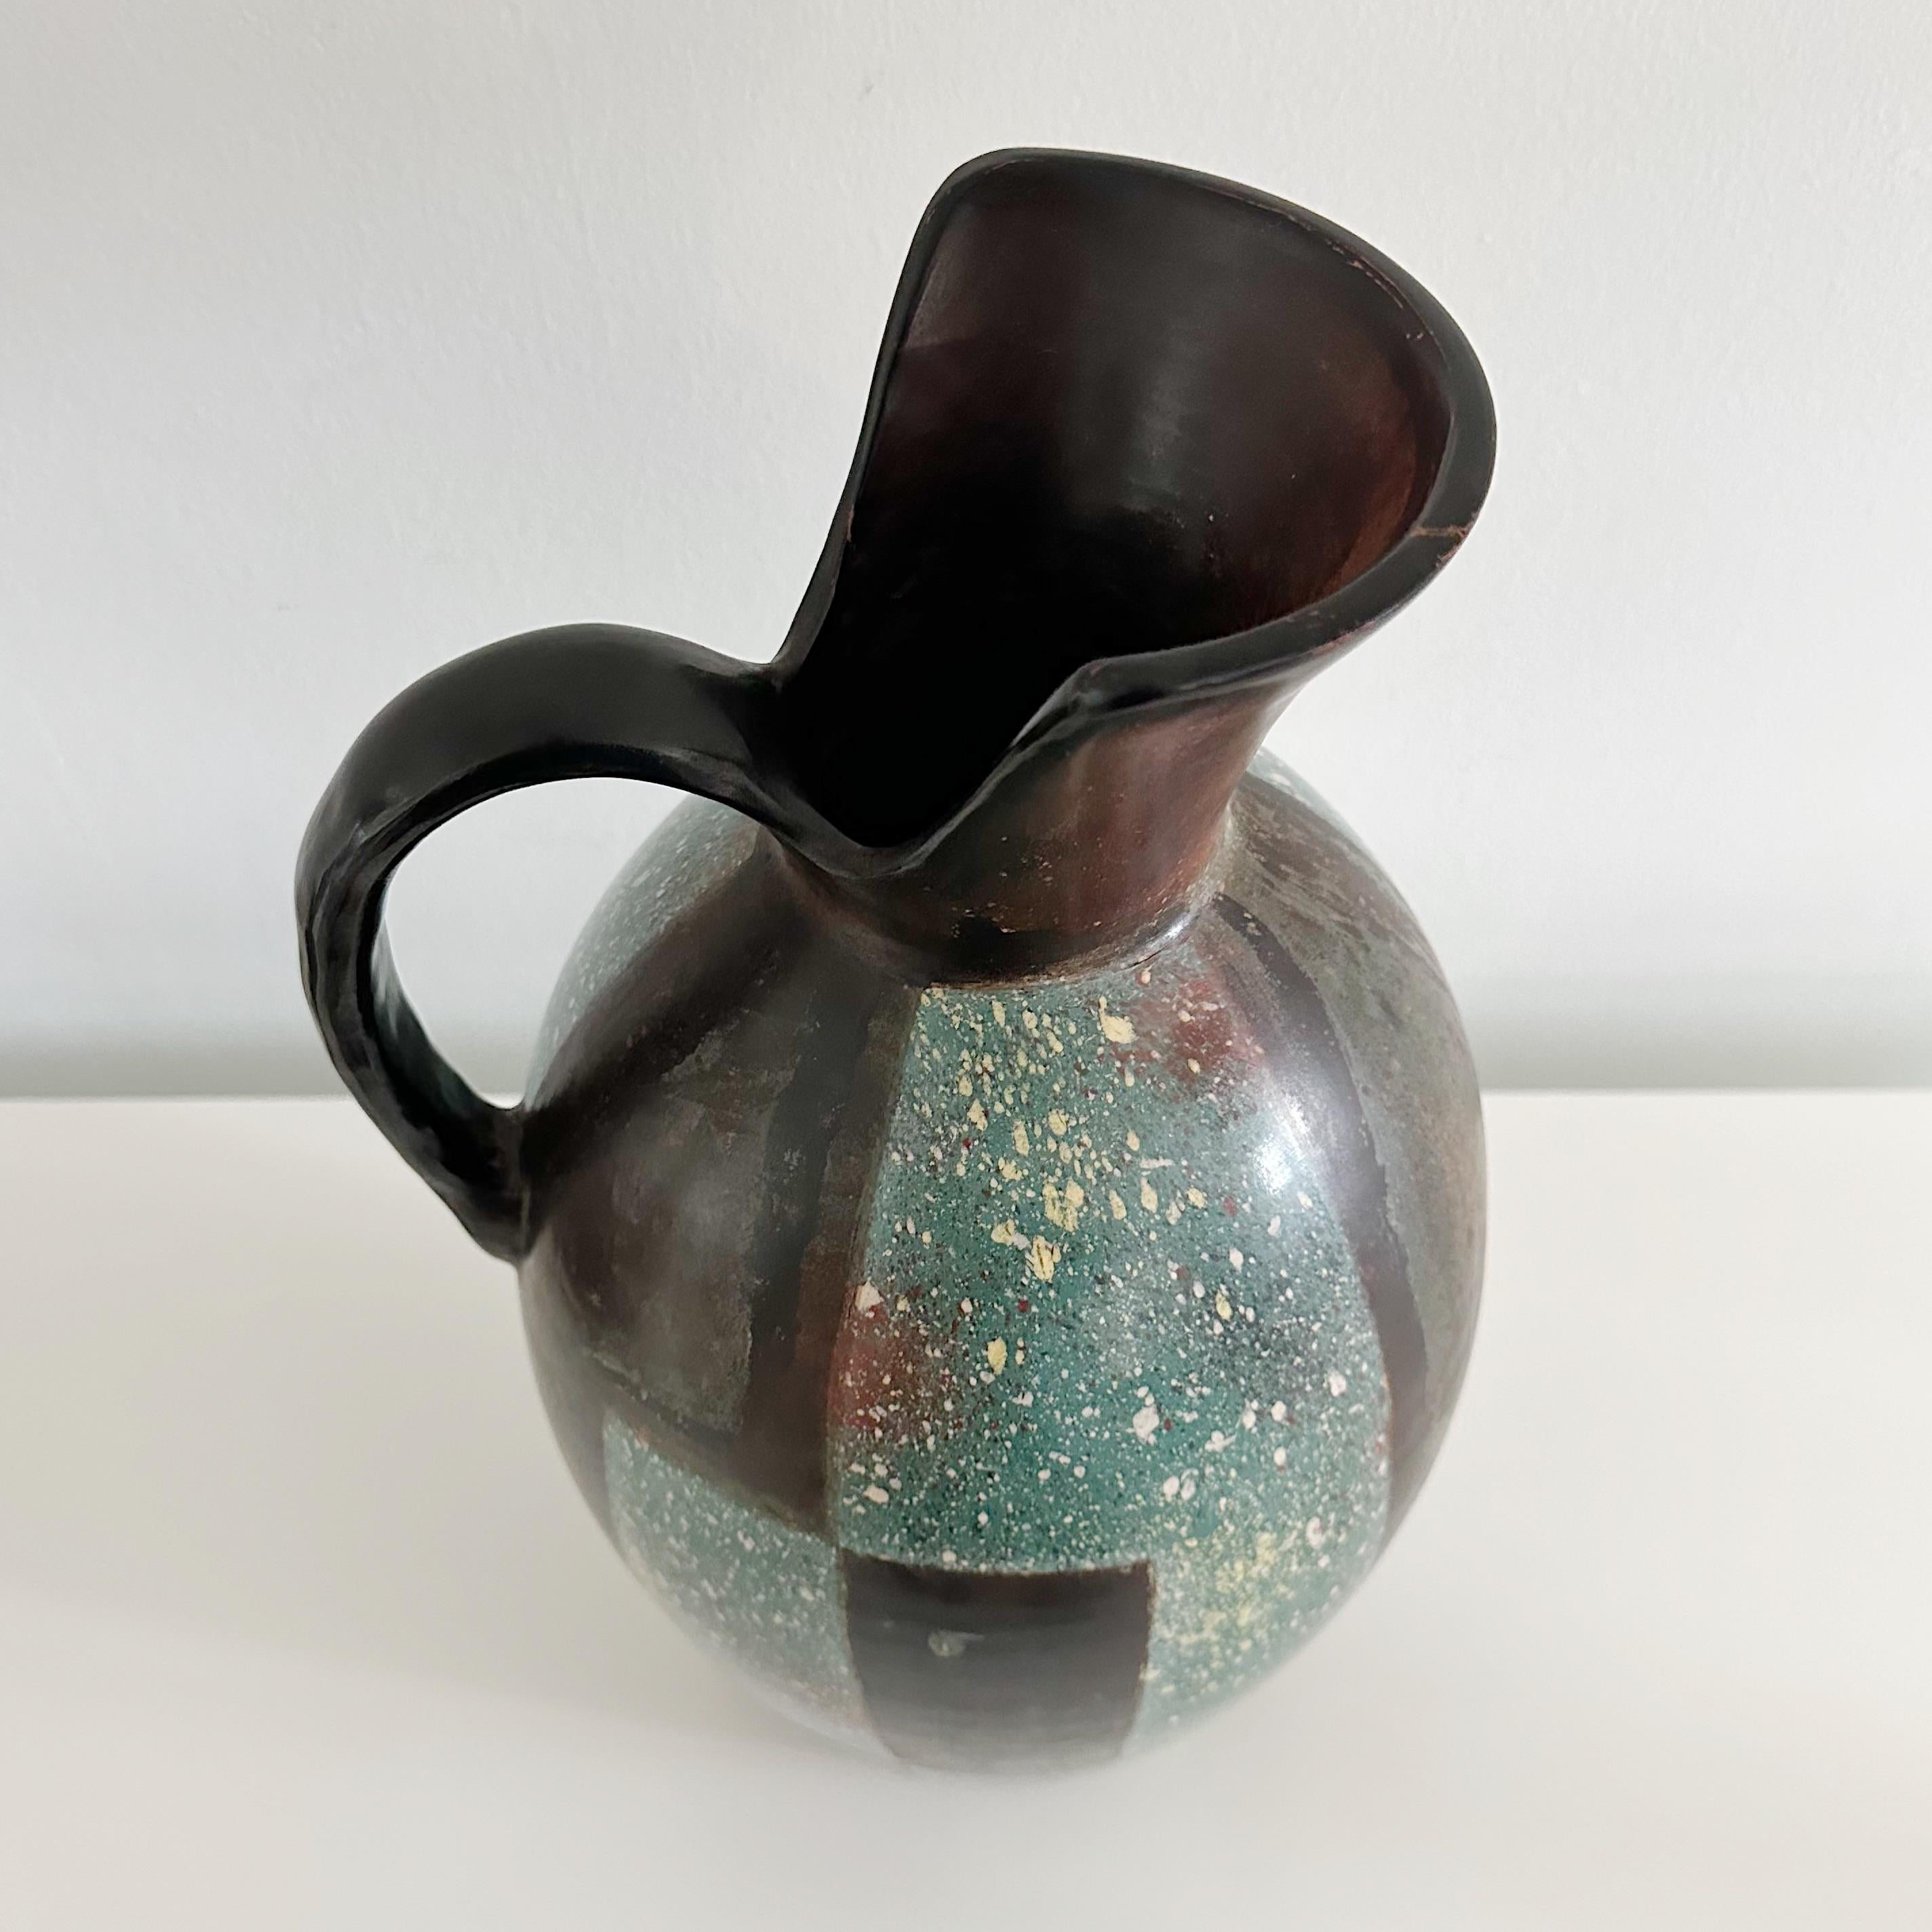 20th Century Santodio Paz Chulucanas Peru Ceramic pitcher. Handcrafted in the Andes mountains of Peru. Teal and brown hues with a unique painted design. Originating from ancient Tallan and Vicus cultures, featuring the technique of 